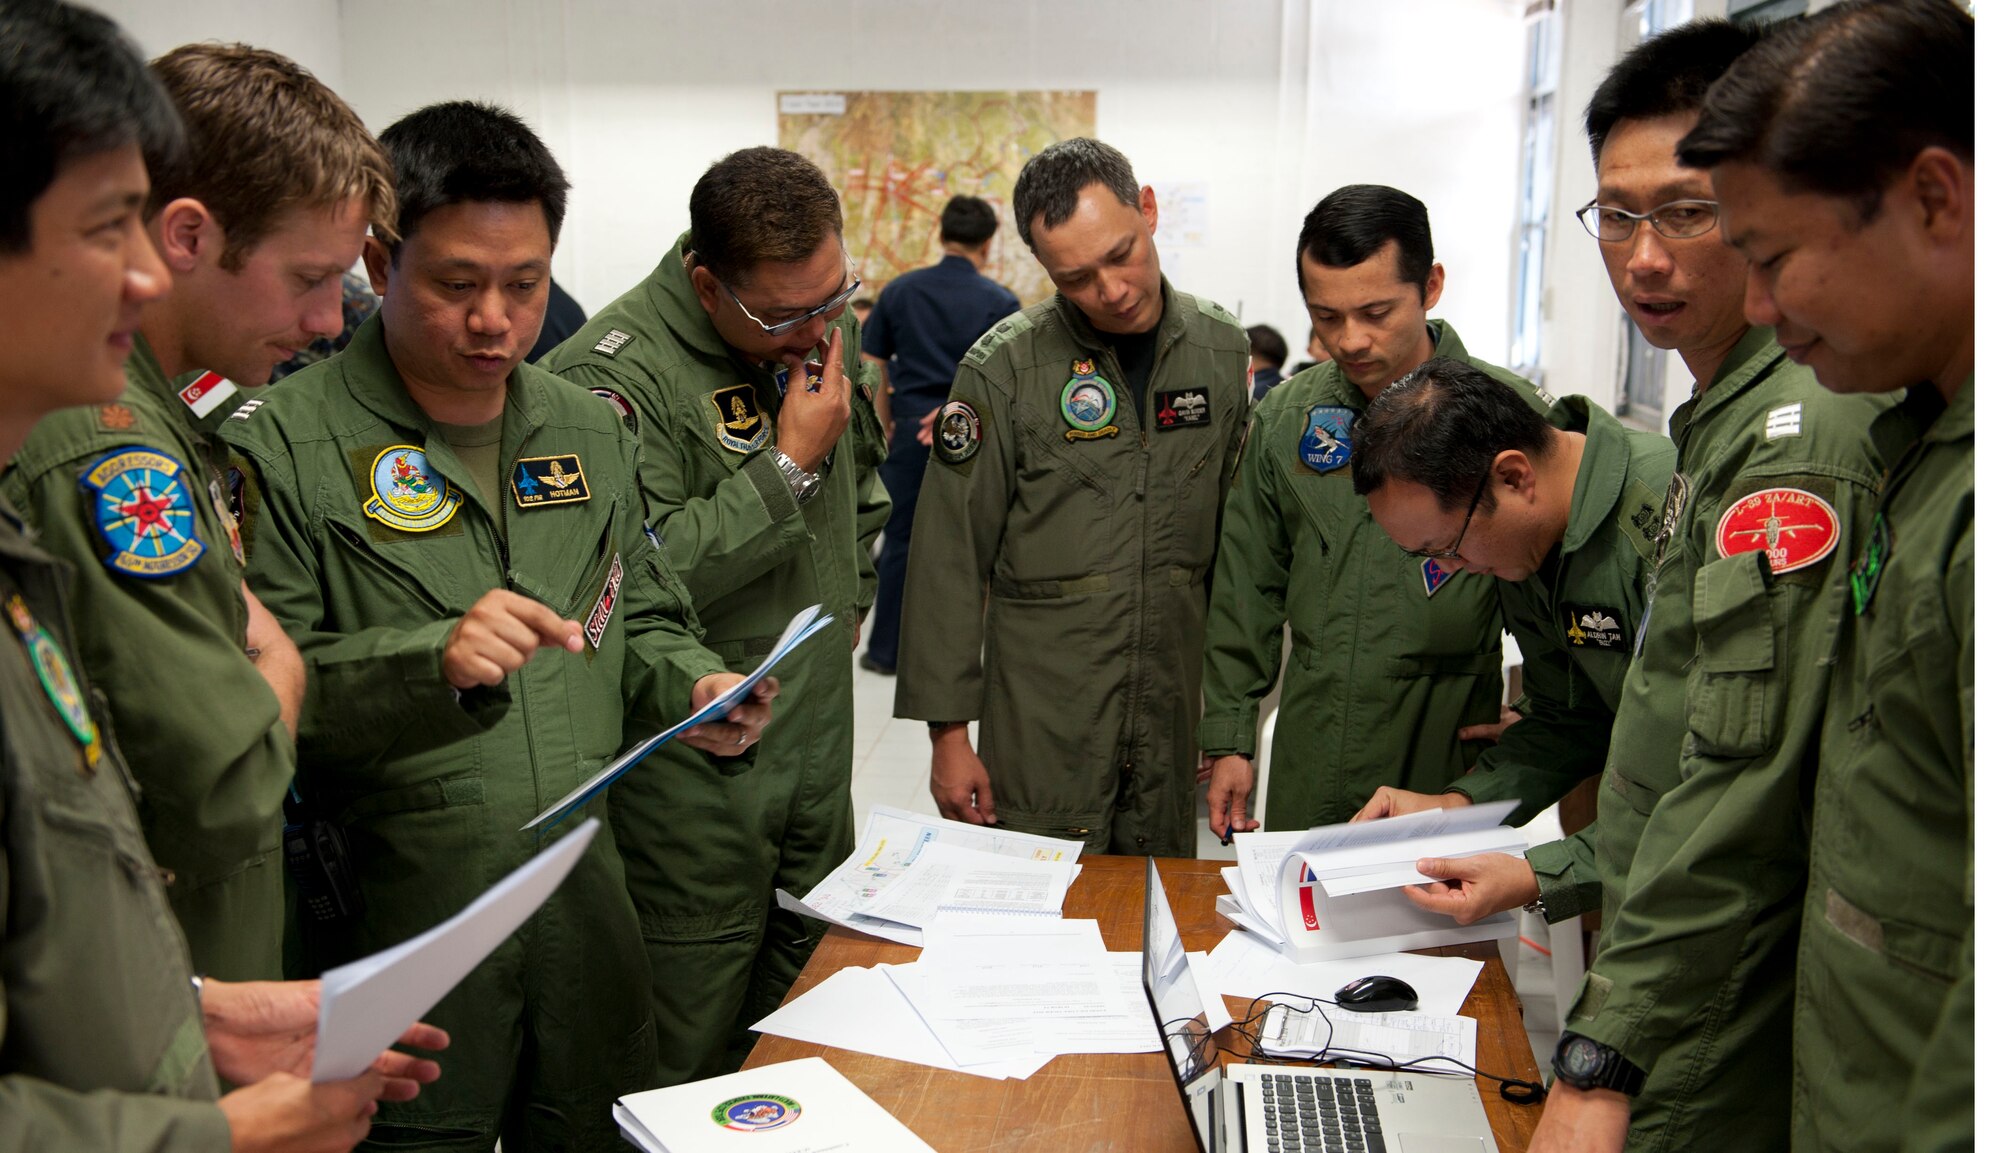 U.S., Thailand and Singapore Air Force pilots discuss mission plans before beginning flying exercises for Multilateral Exercise Cope Tiger in Korat, Thailand. Cope Tiger 2014 is an annual, multilateral aerial exercise to improve combat readiness, interoperability and build relations among the three nations. (U.S. Air Force photo by 2Lt. Michael Harrington/Released)